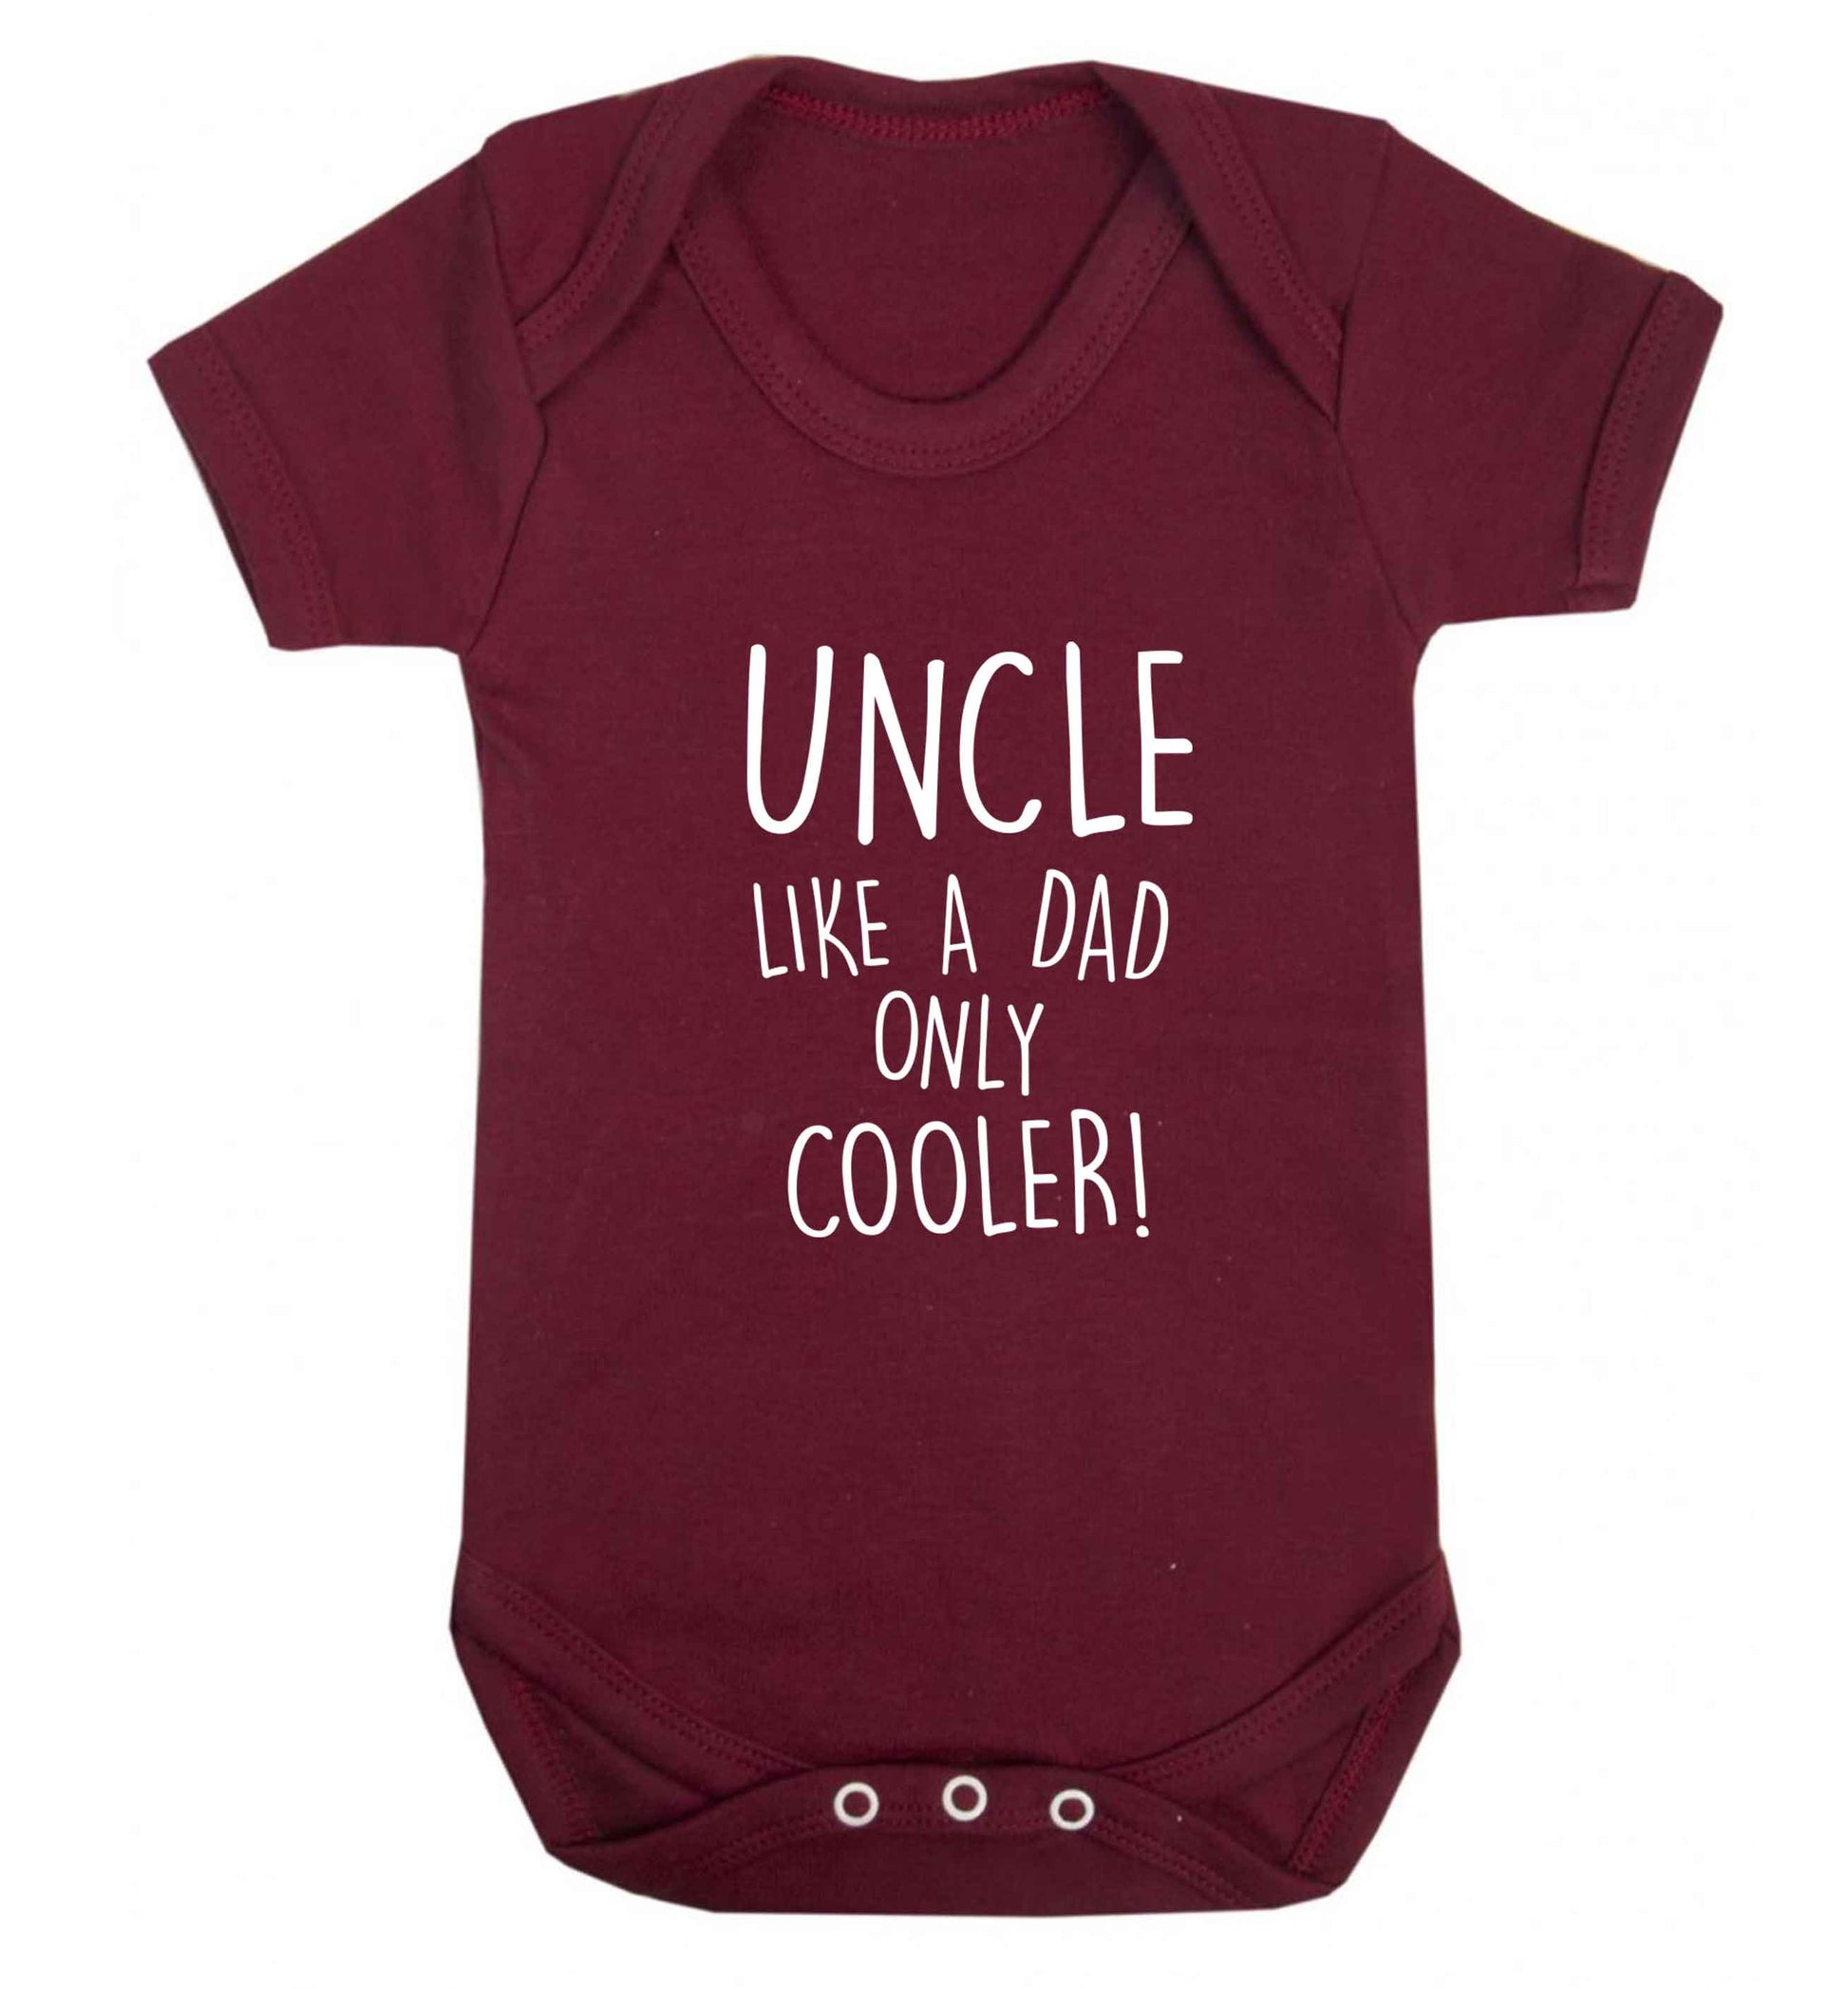 Uncle like a dad only cooler baby vest maroon 18-24 months